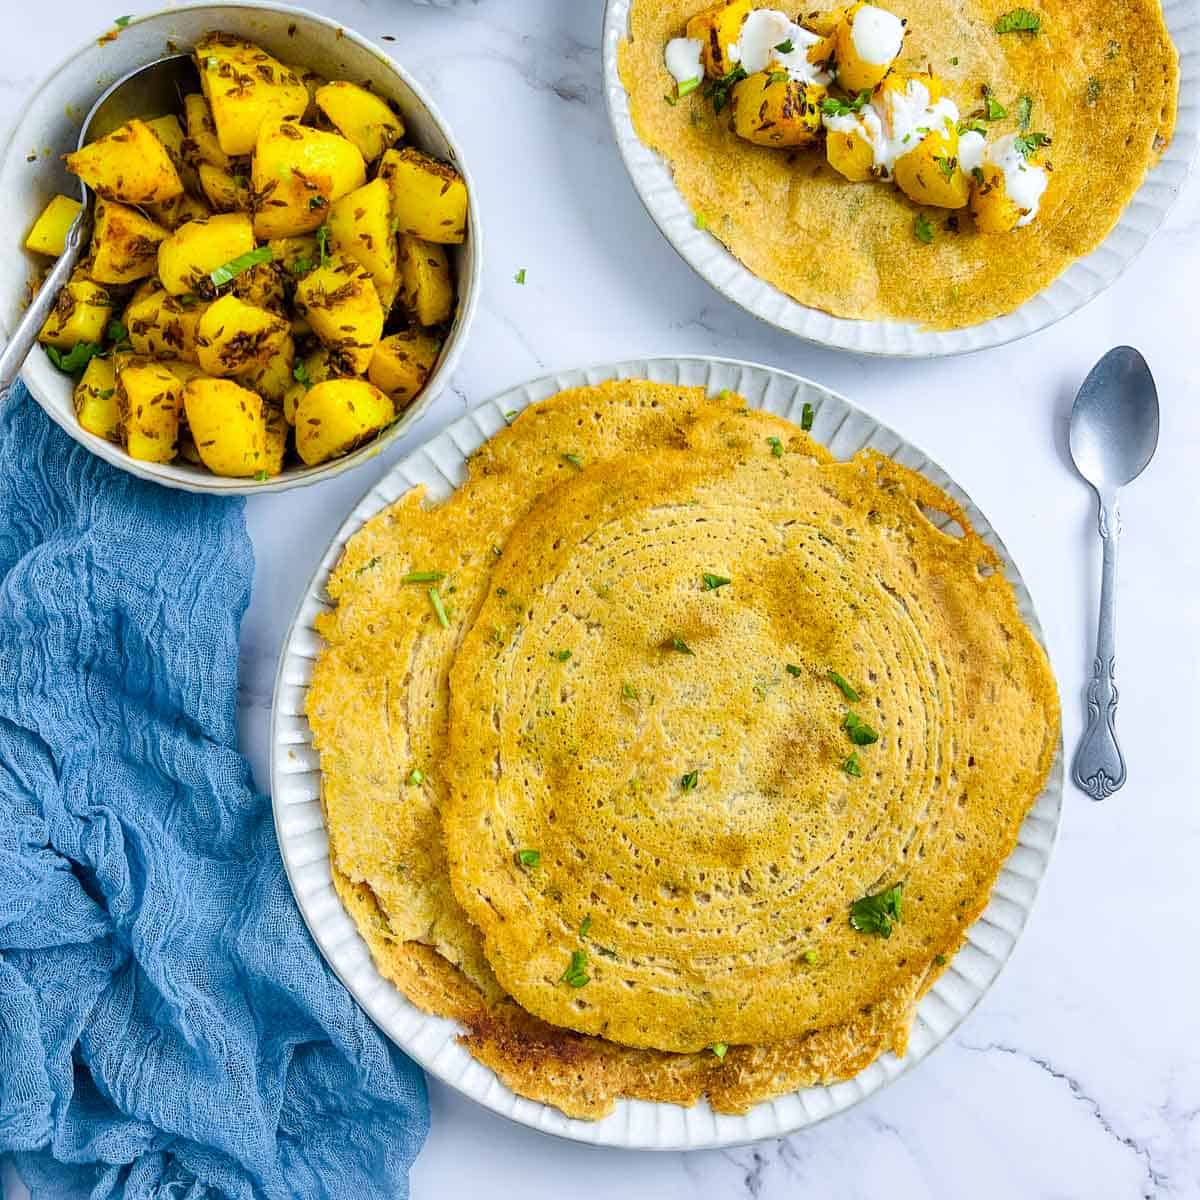 Red lentil pancakes served with cumin-flavored potatoes.